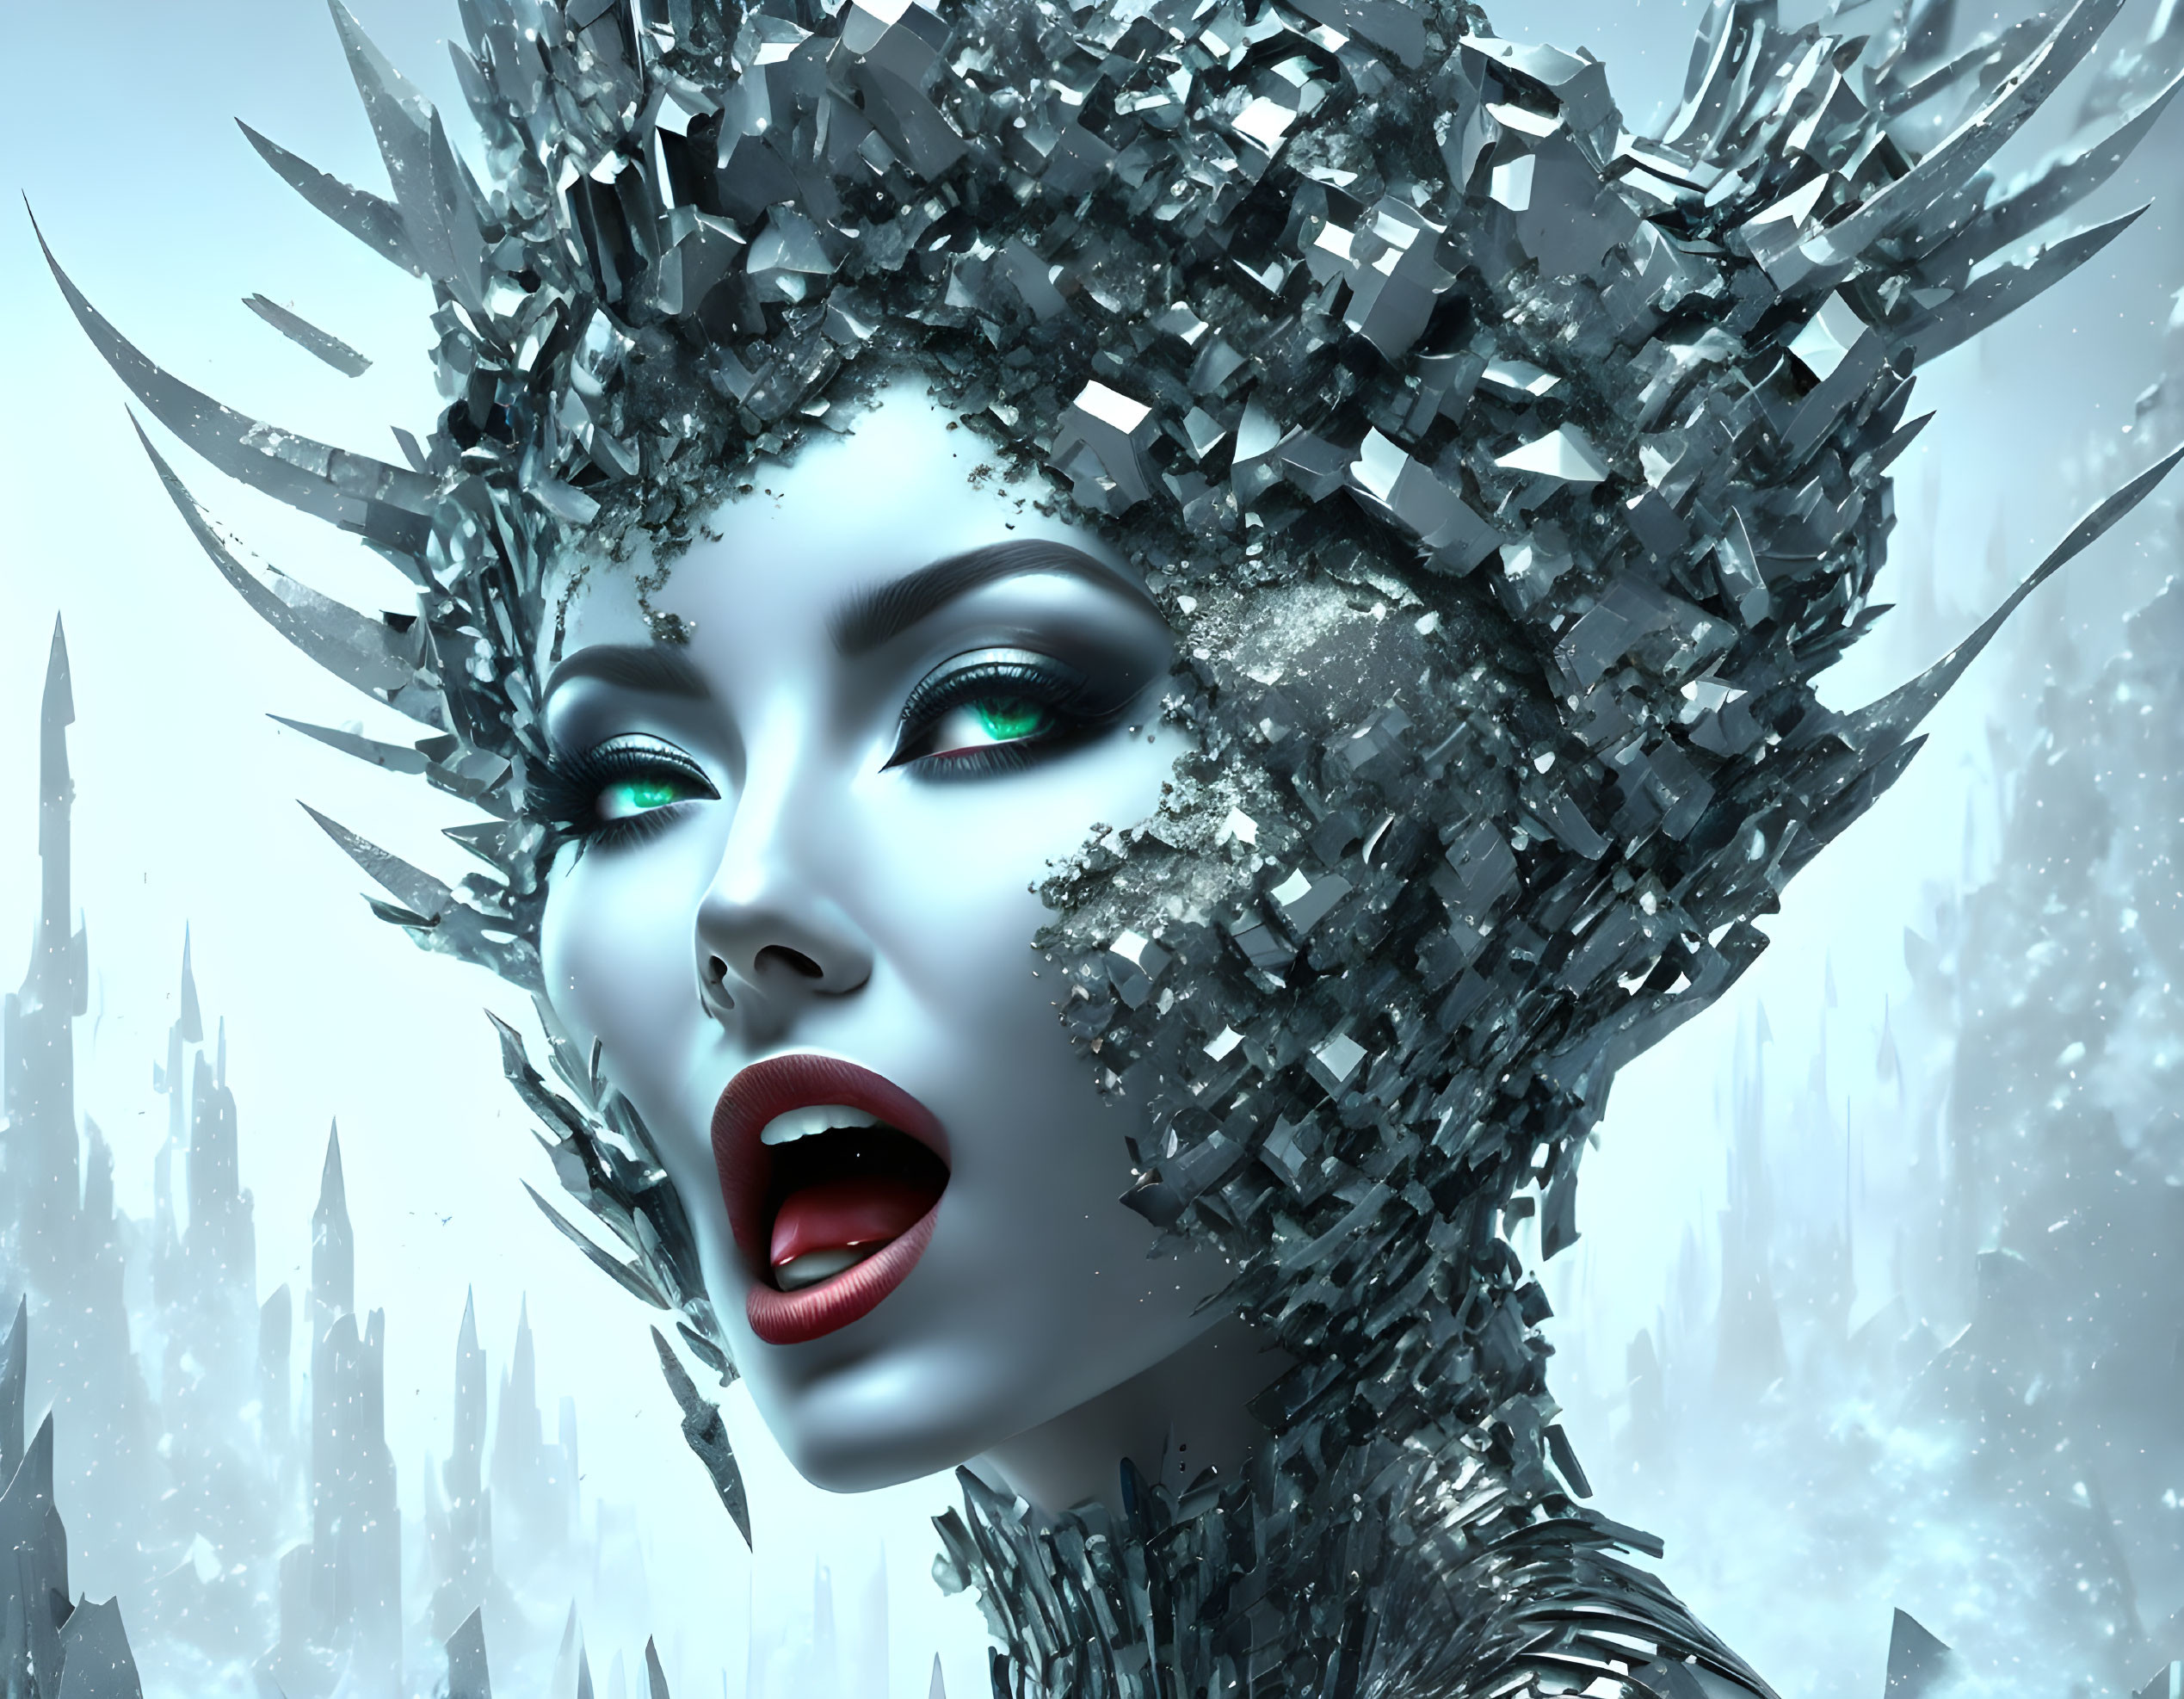 Fantastical figure with shattered glass crown in icy backdrop.